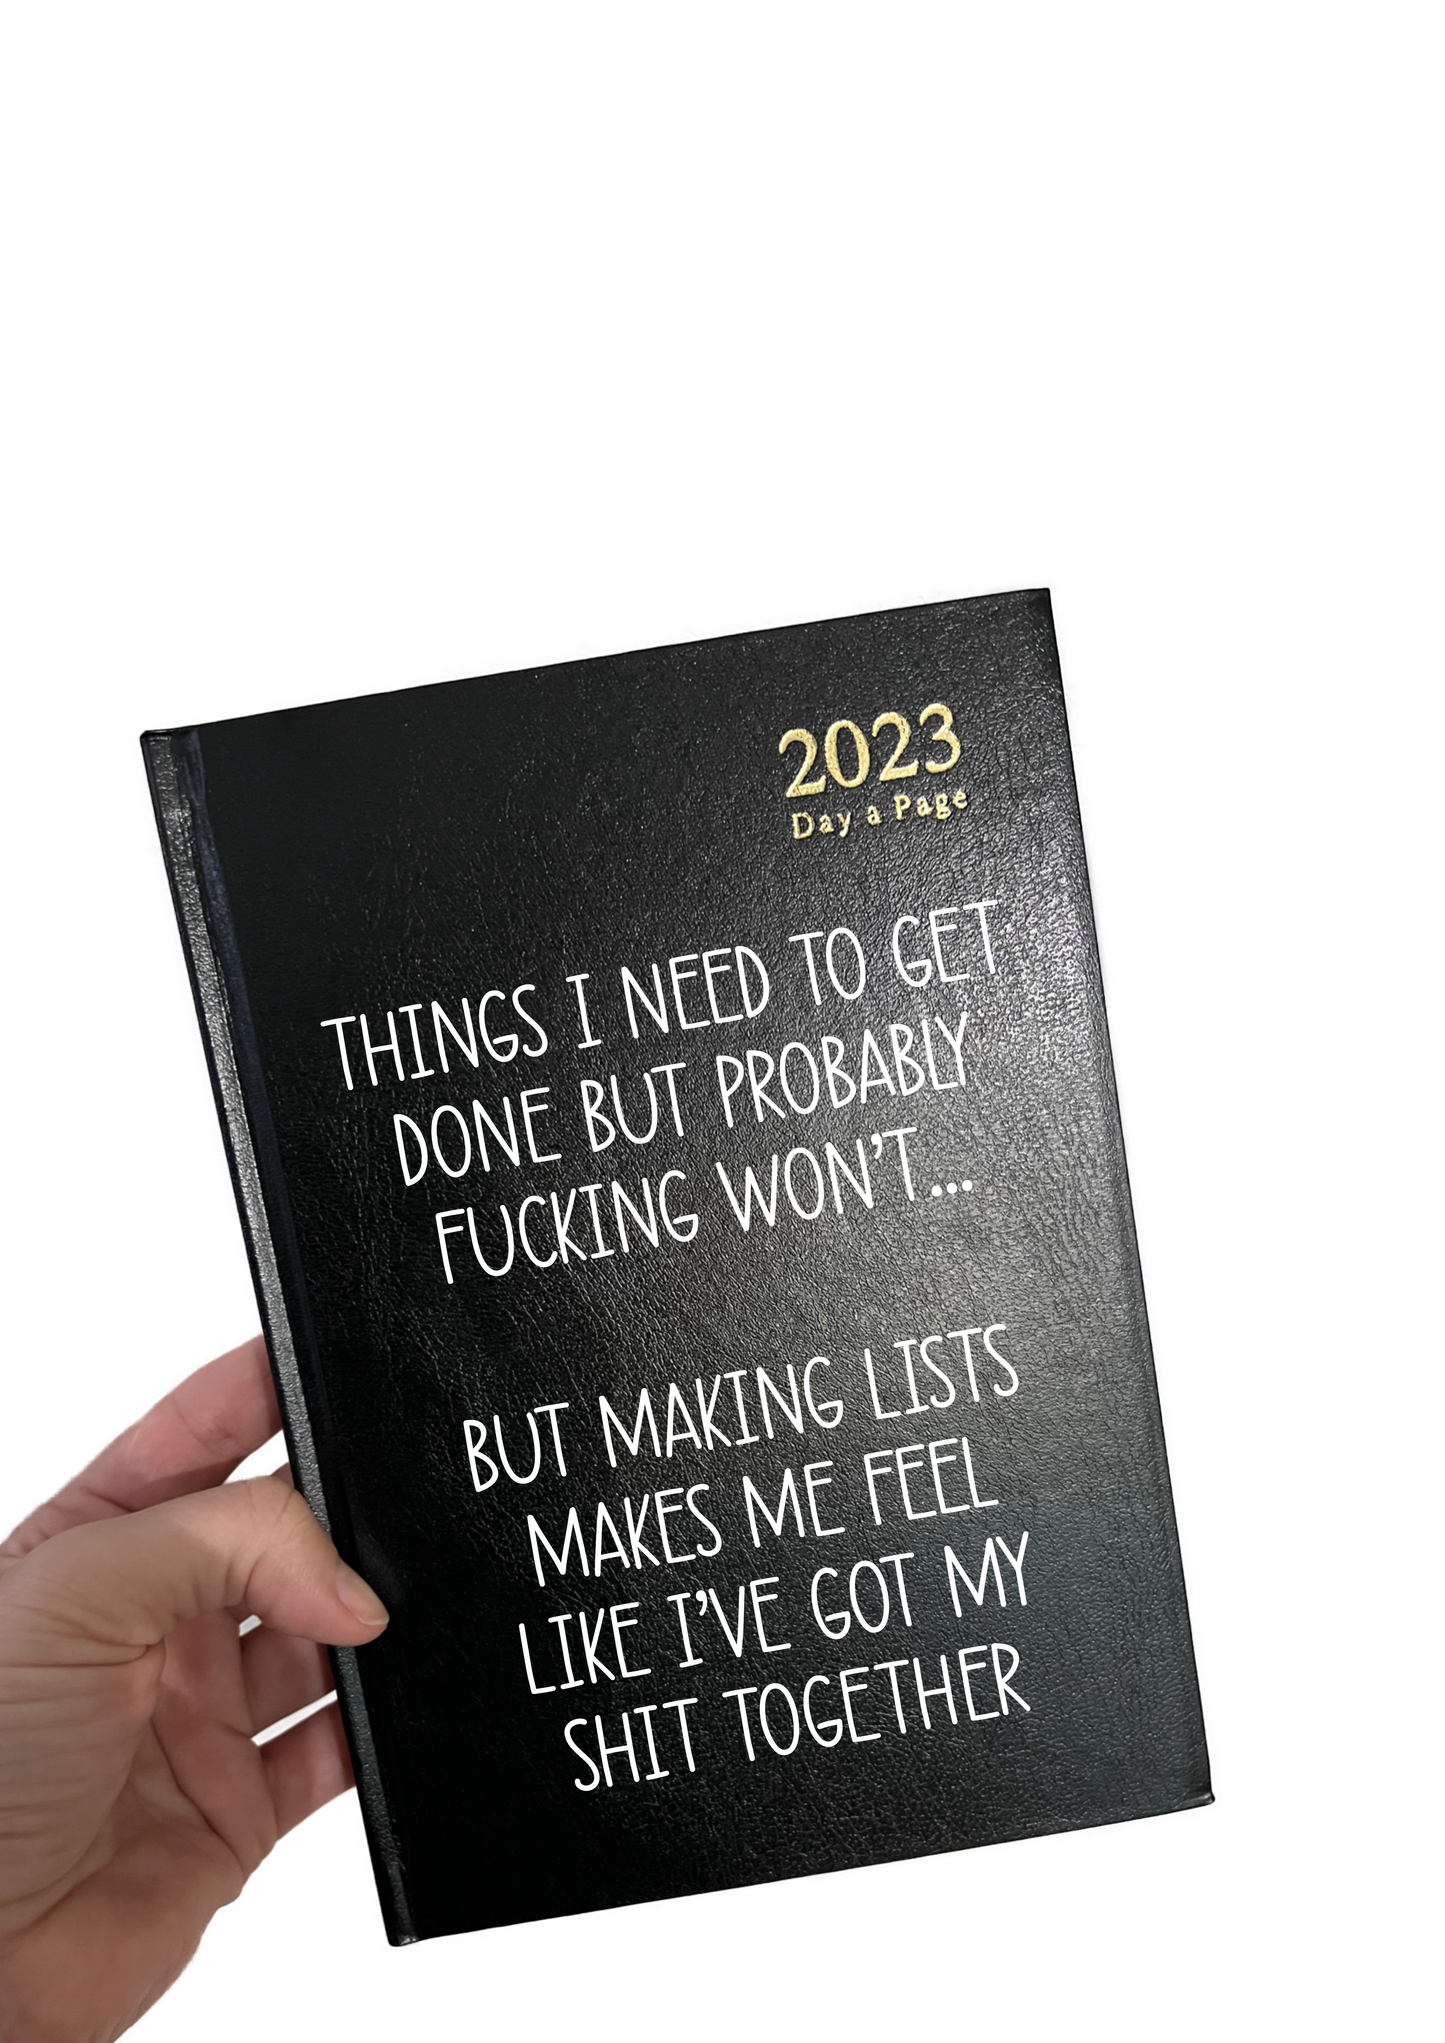 Diary - Making Lists Makes Me Feel Like I've Got My Shit Together